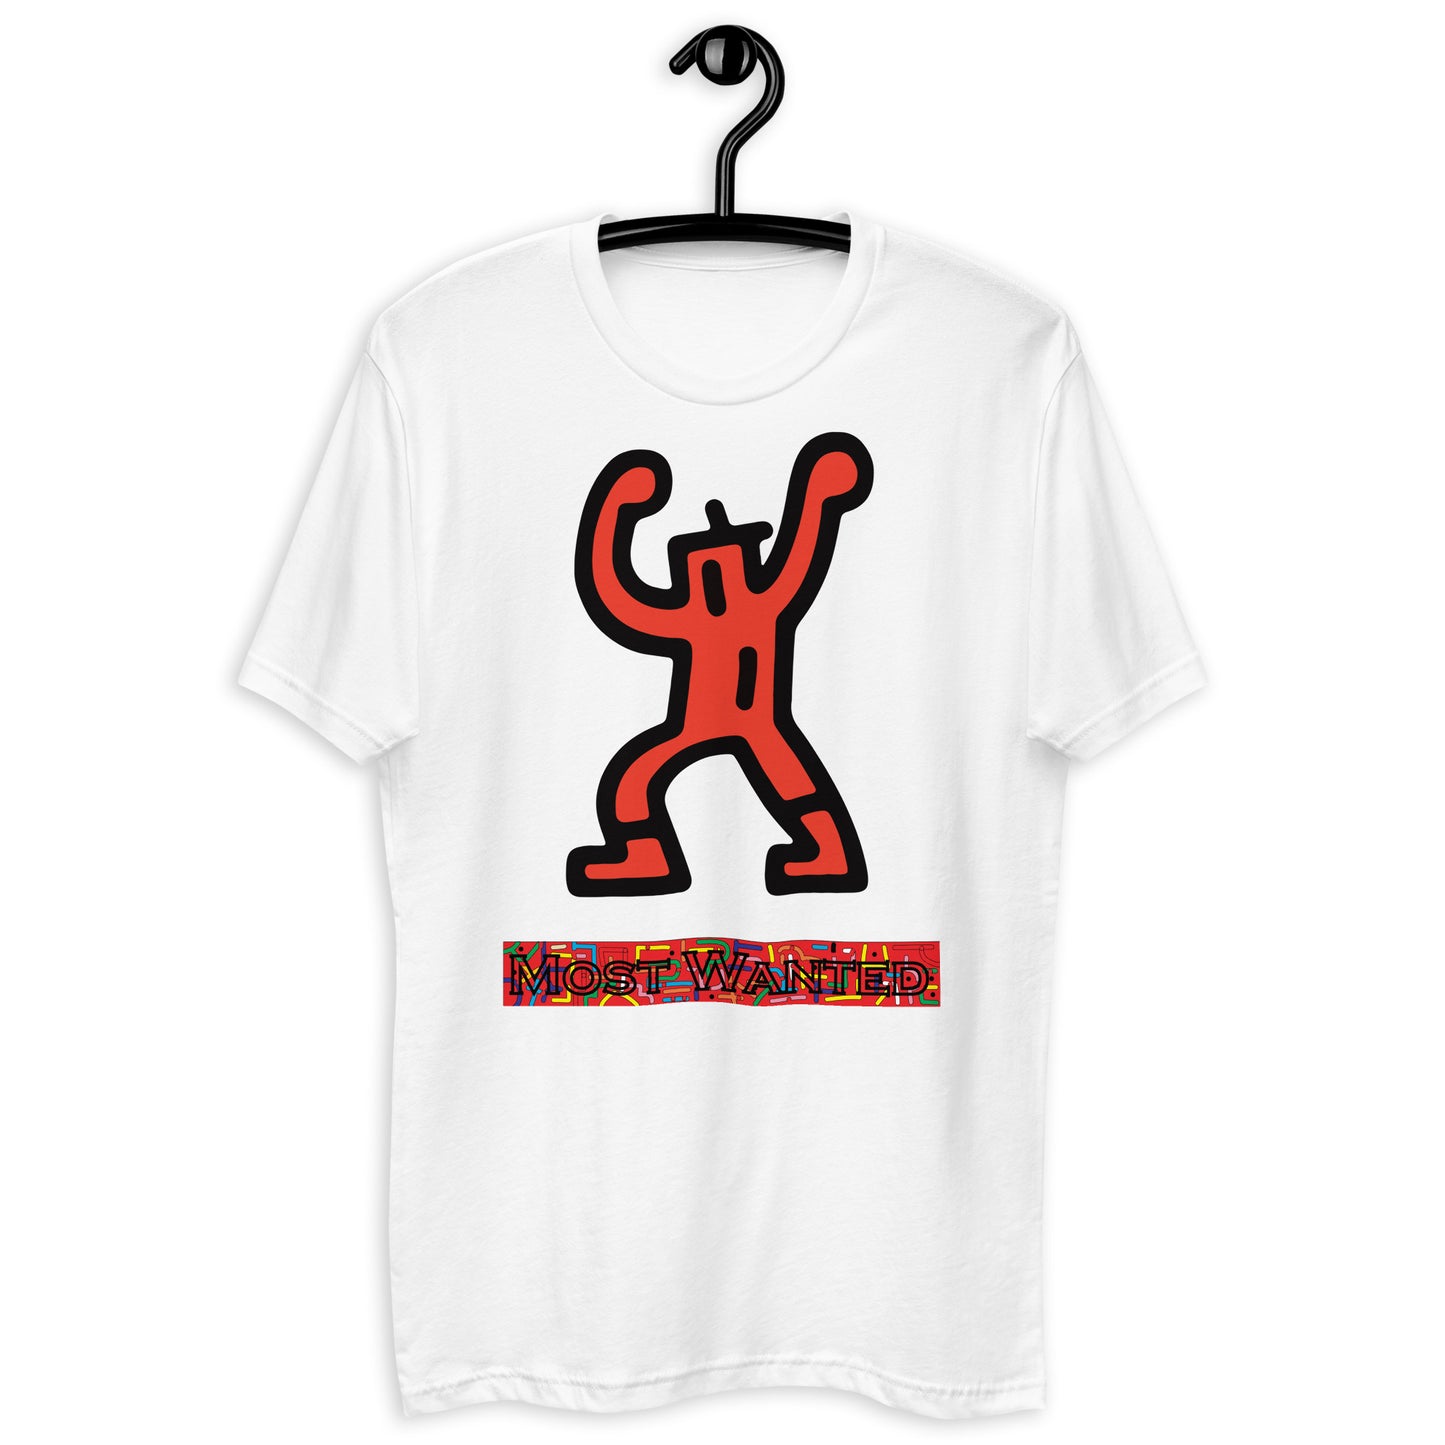 Doodles Me "Most Wanted" T-shirt #1